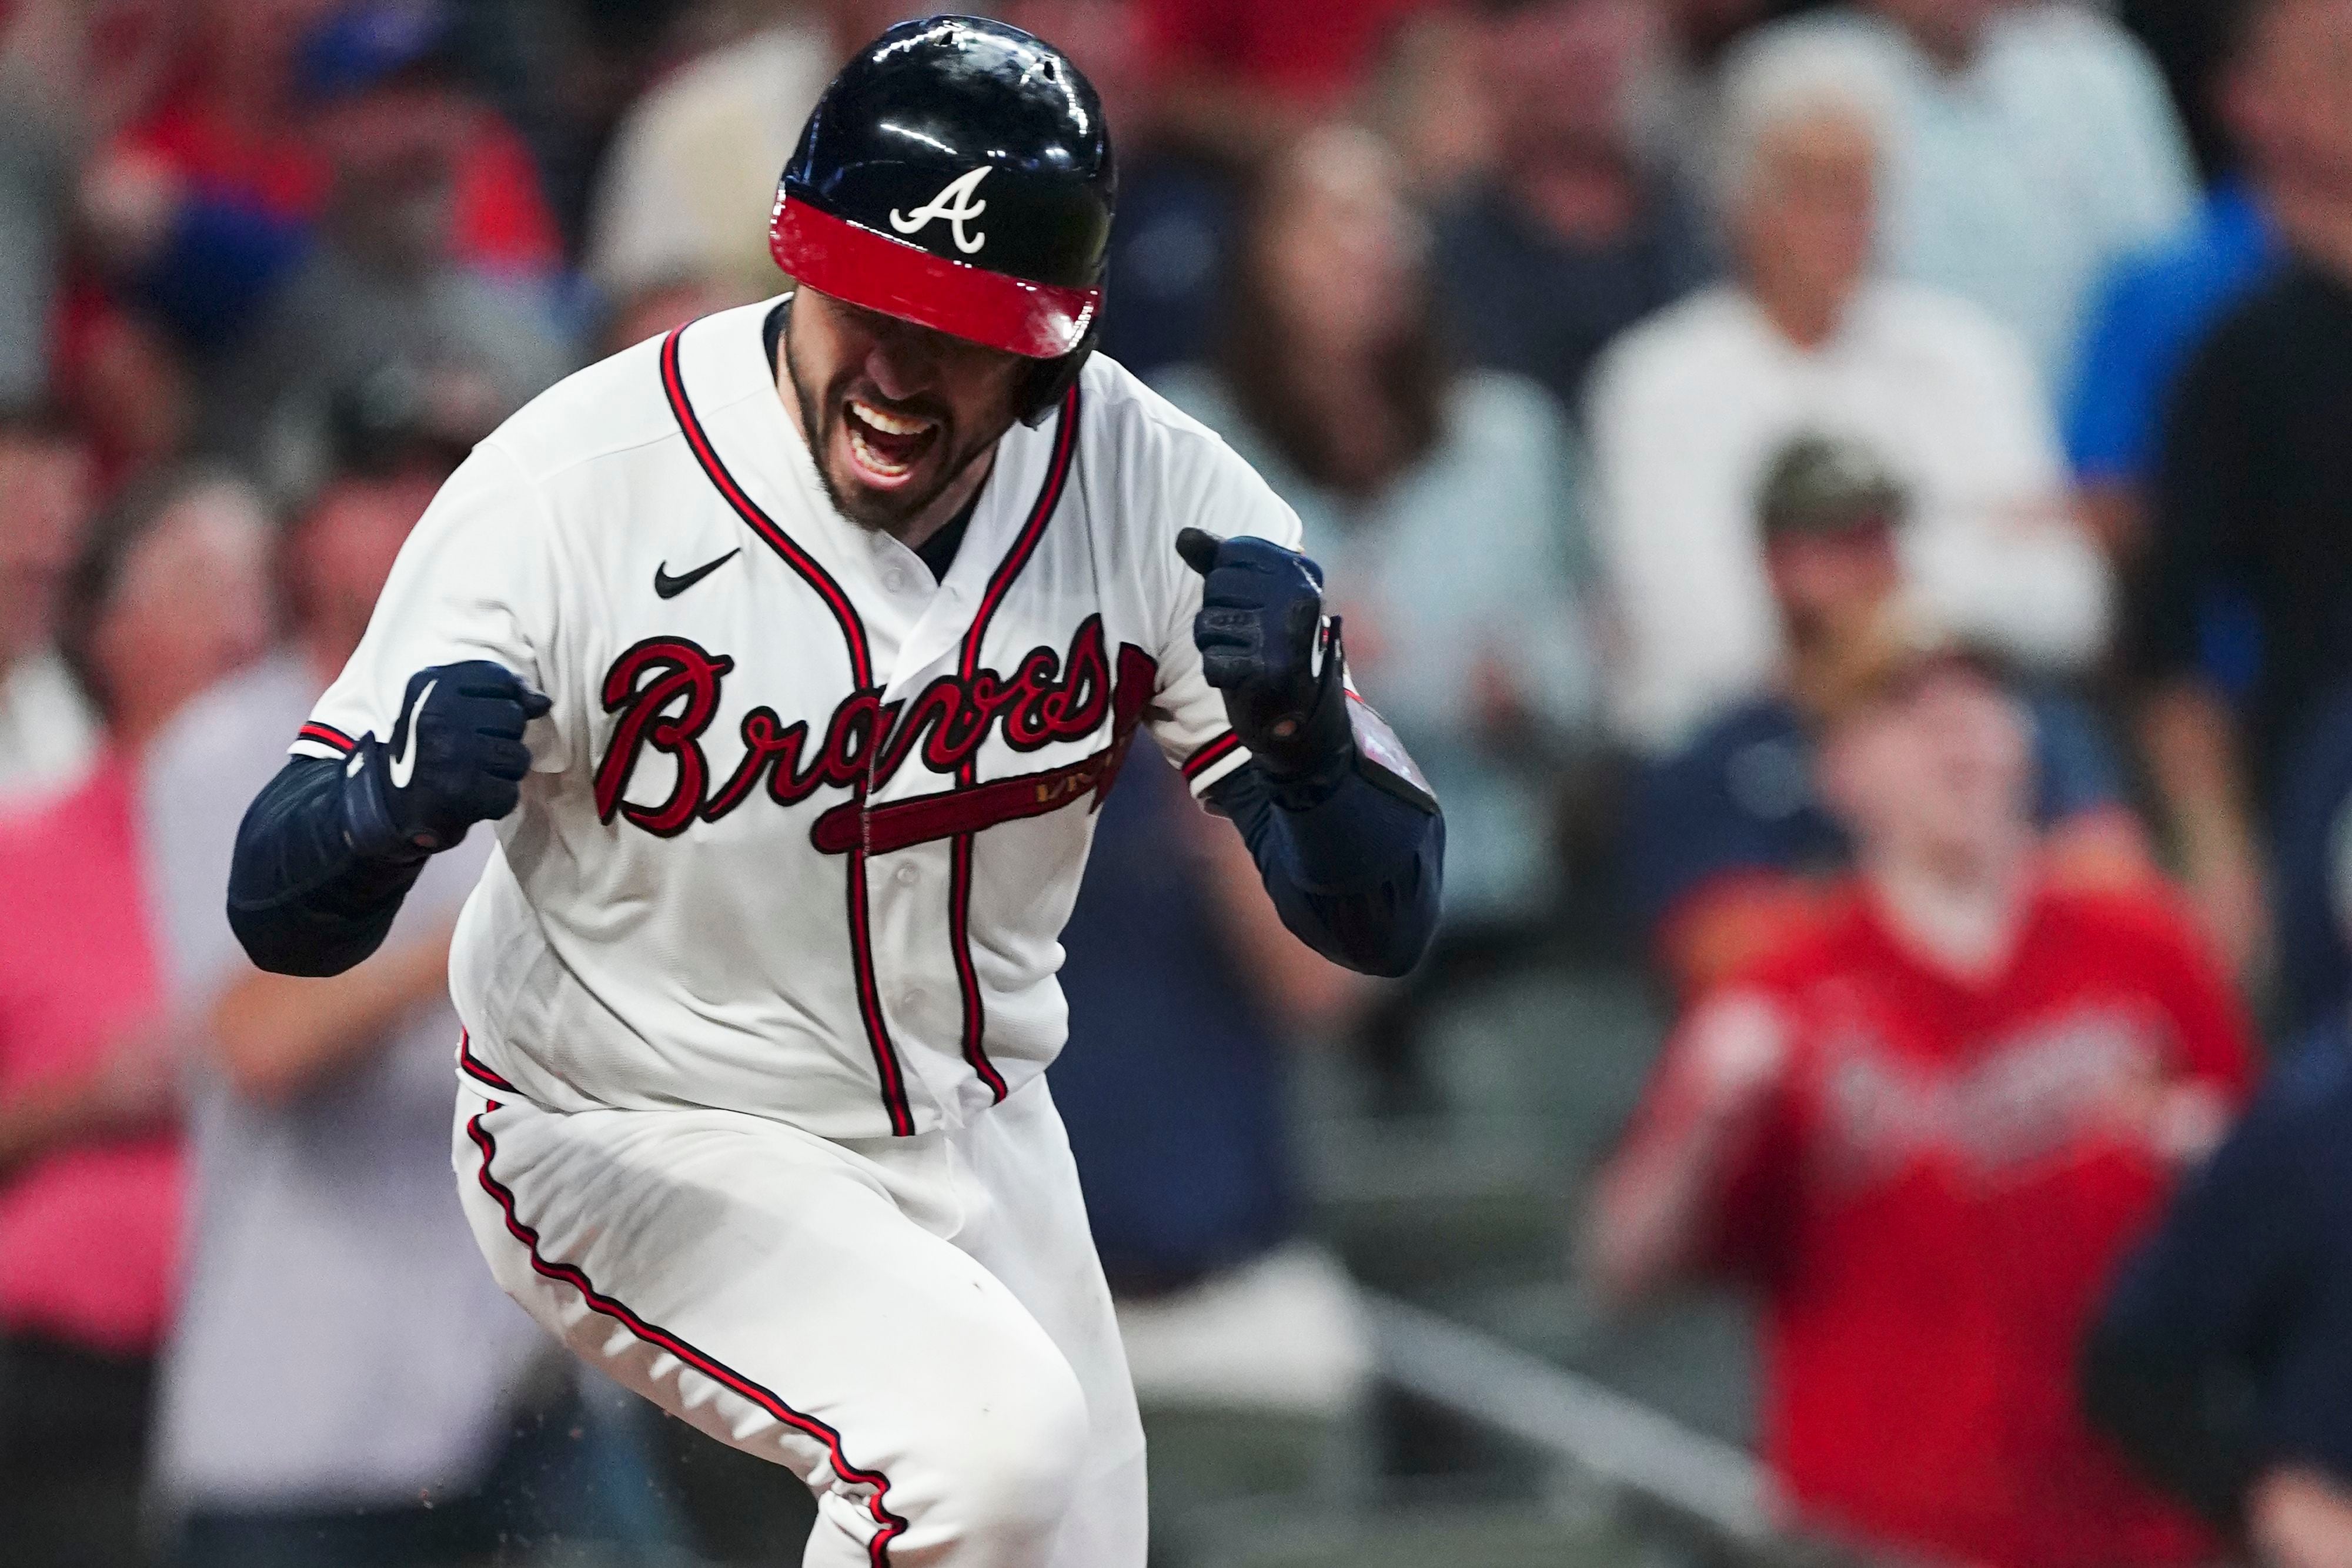 Atlanta Braves' Jorge Soler tests positive for COVID-19 prior to NLDS Game  4 vs. Milwaukee Brewers - ESPN